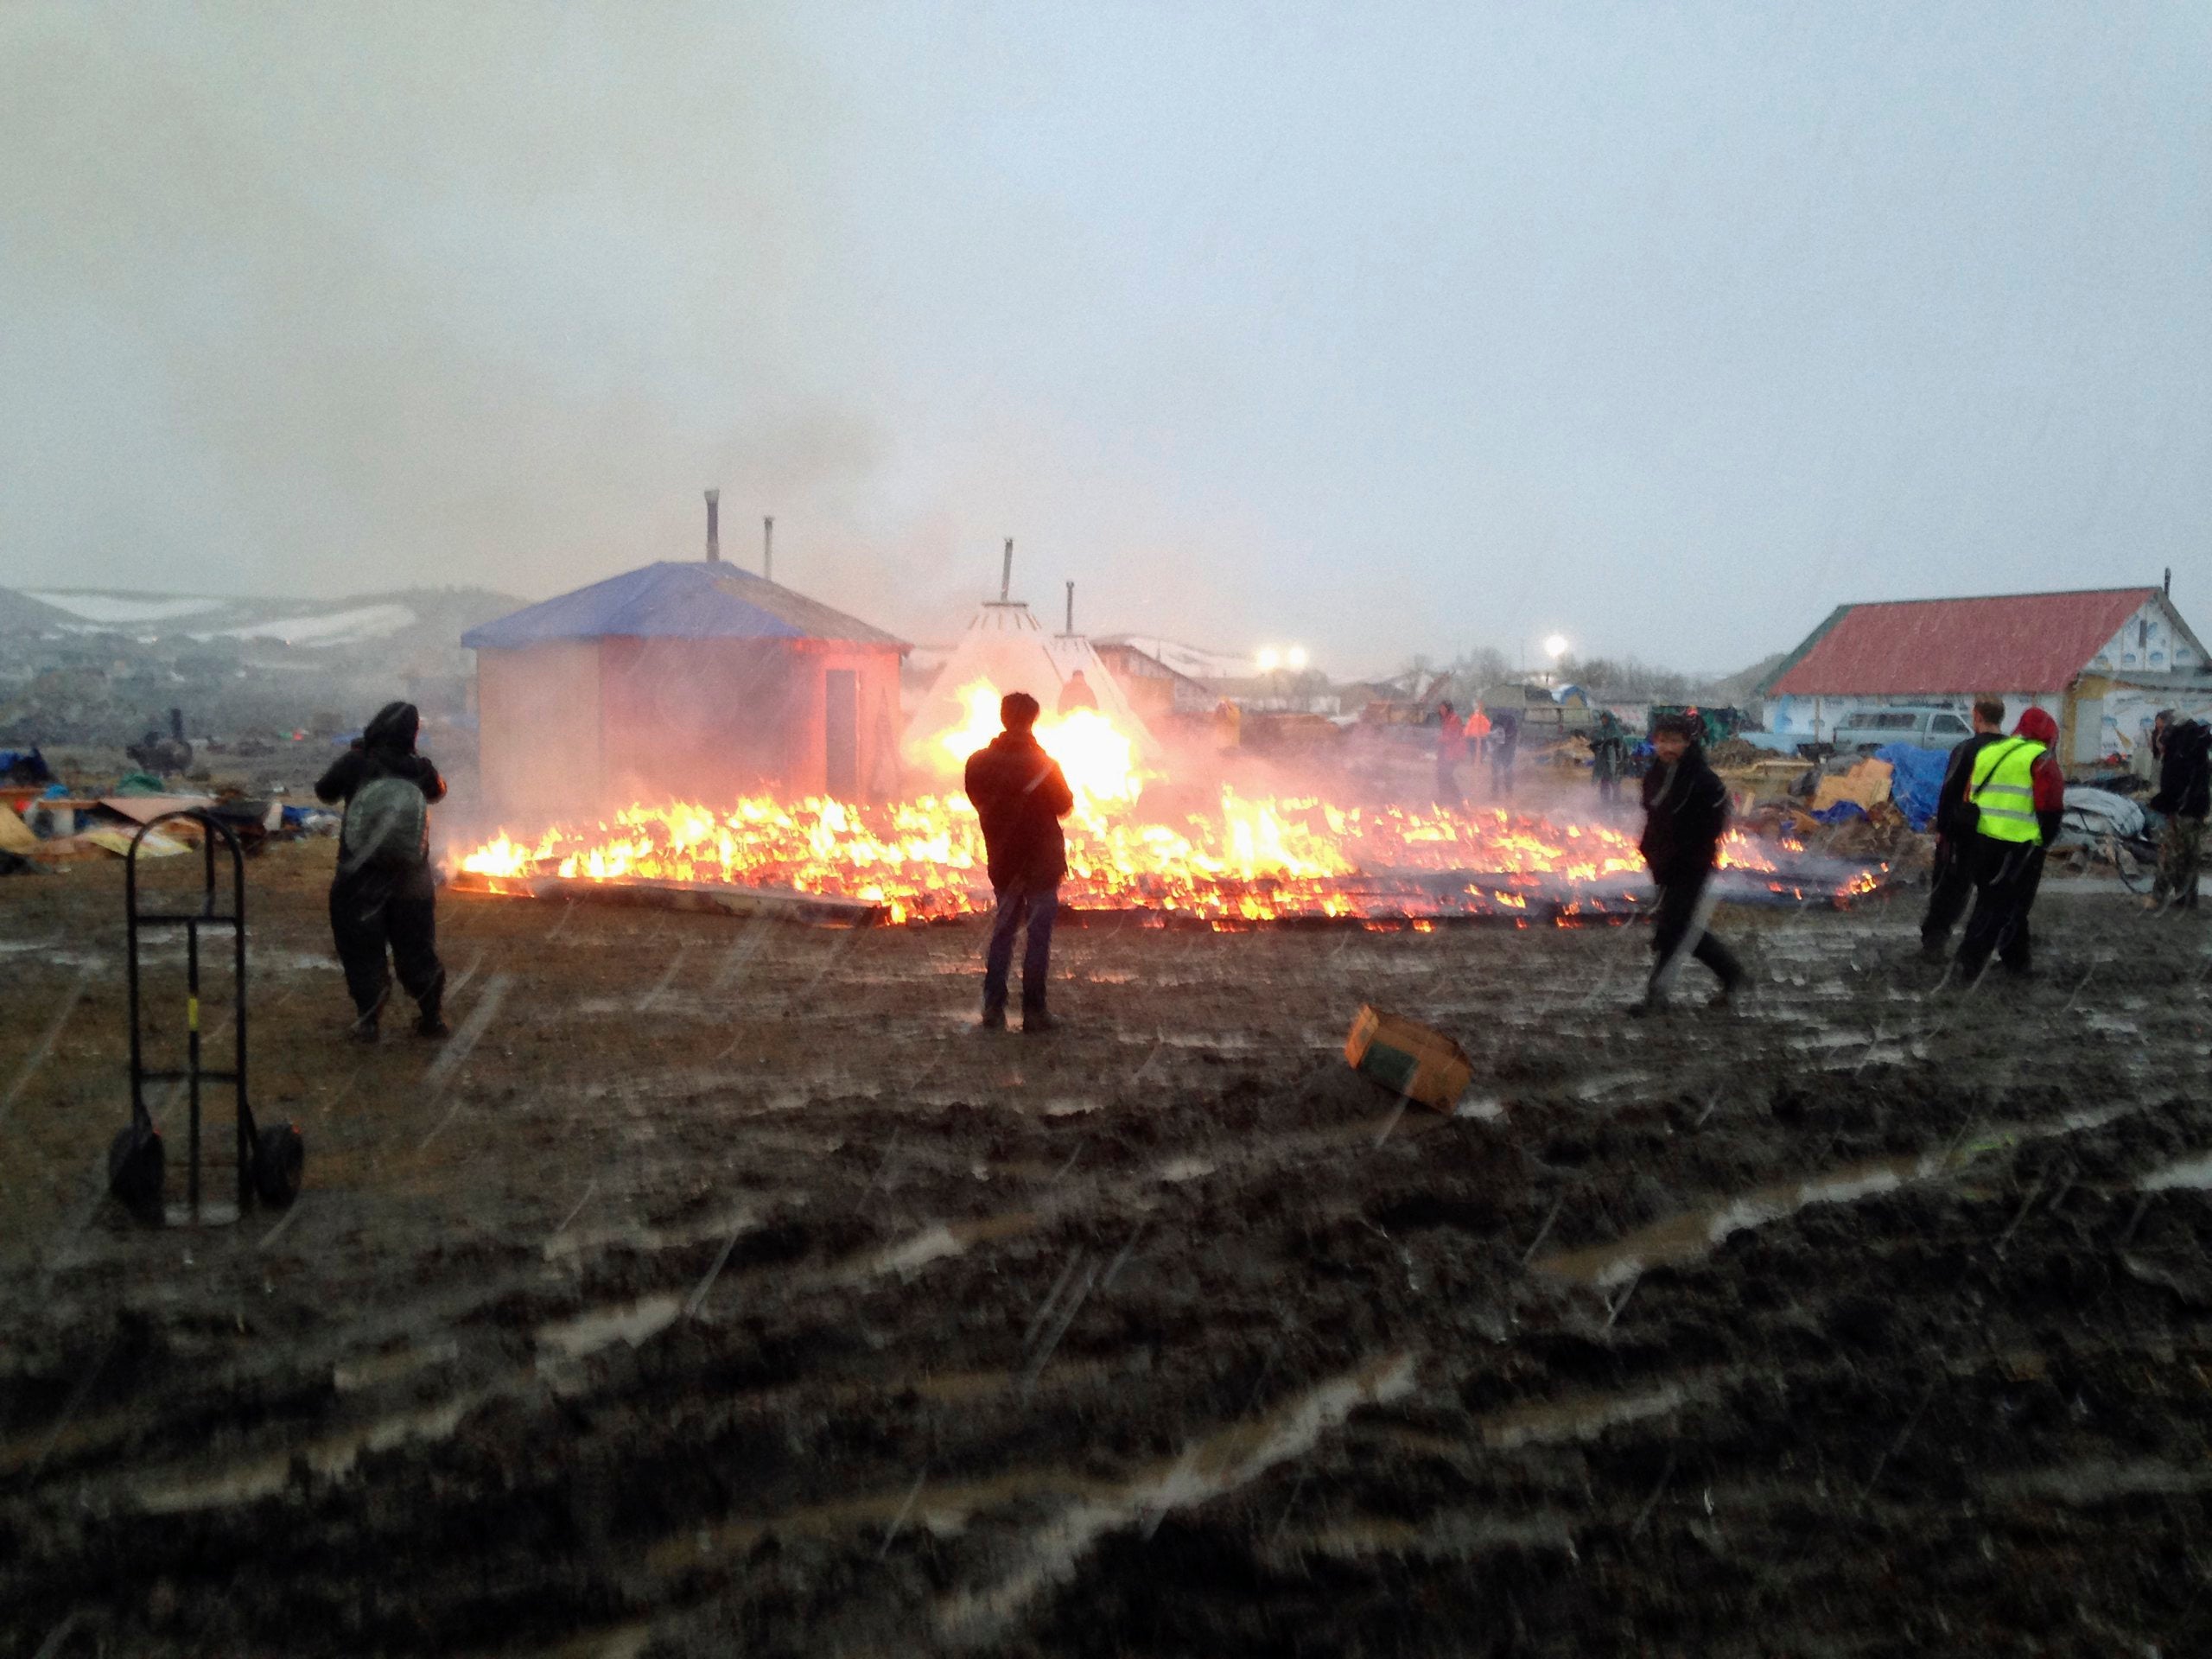 Protesters Pray And Set Fire At Dakota Access Pipeline Camp Ahead Of Shutdown